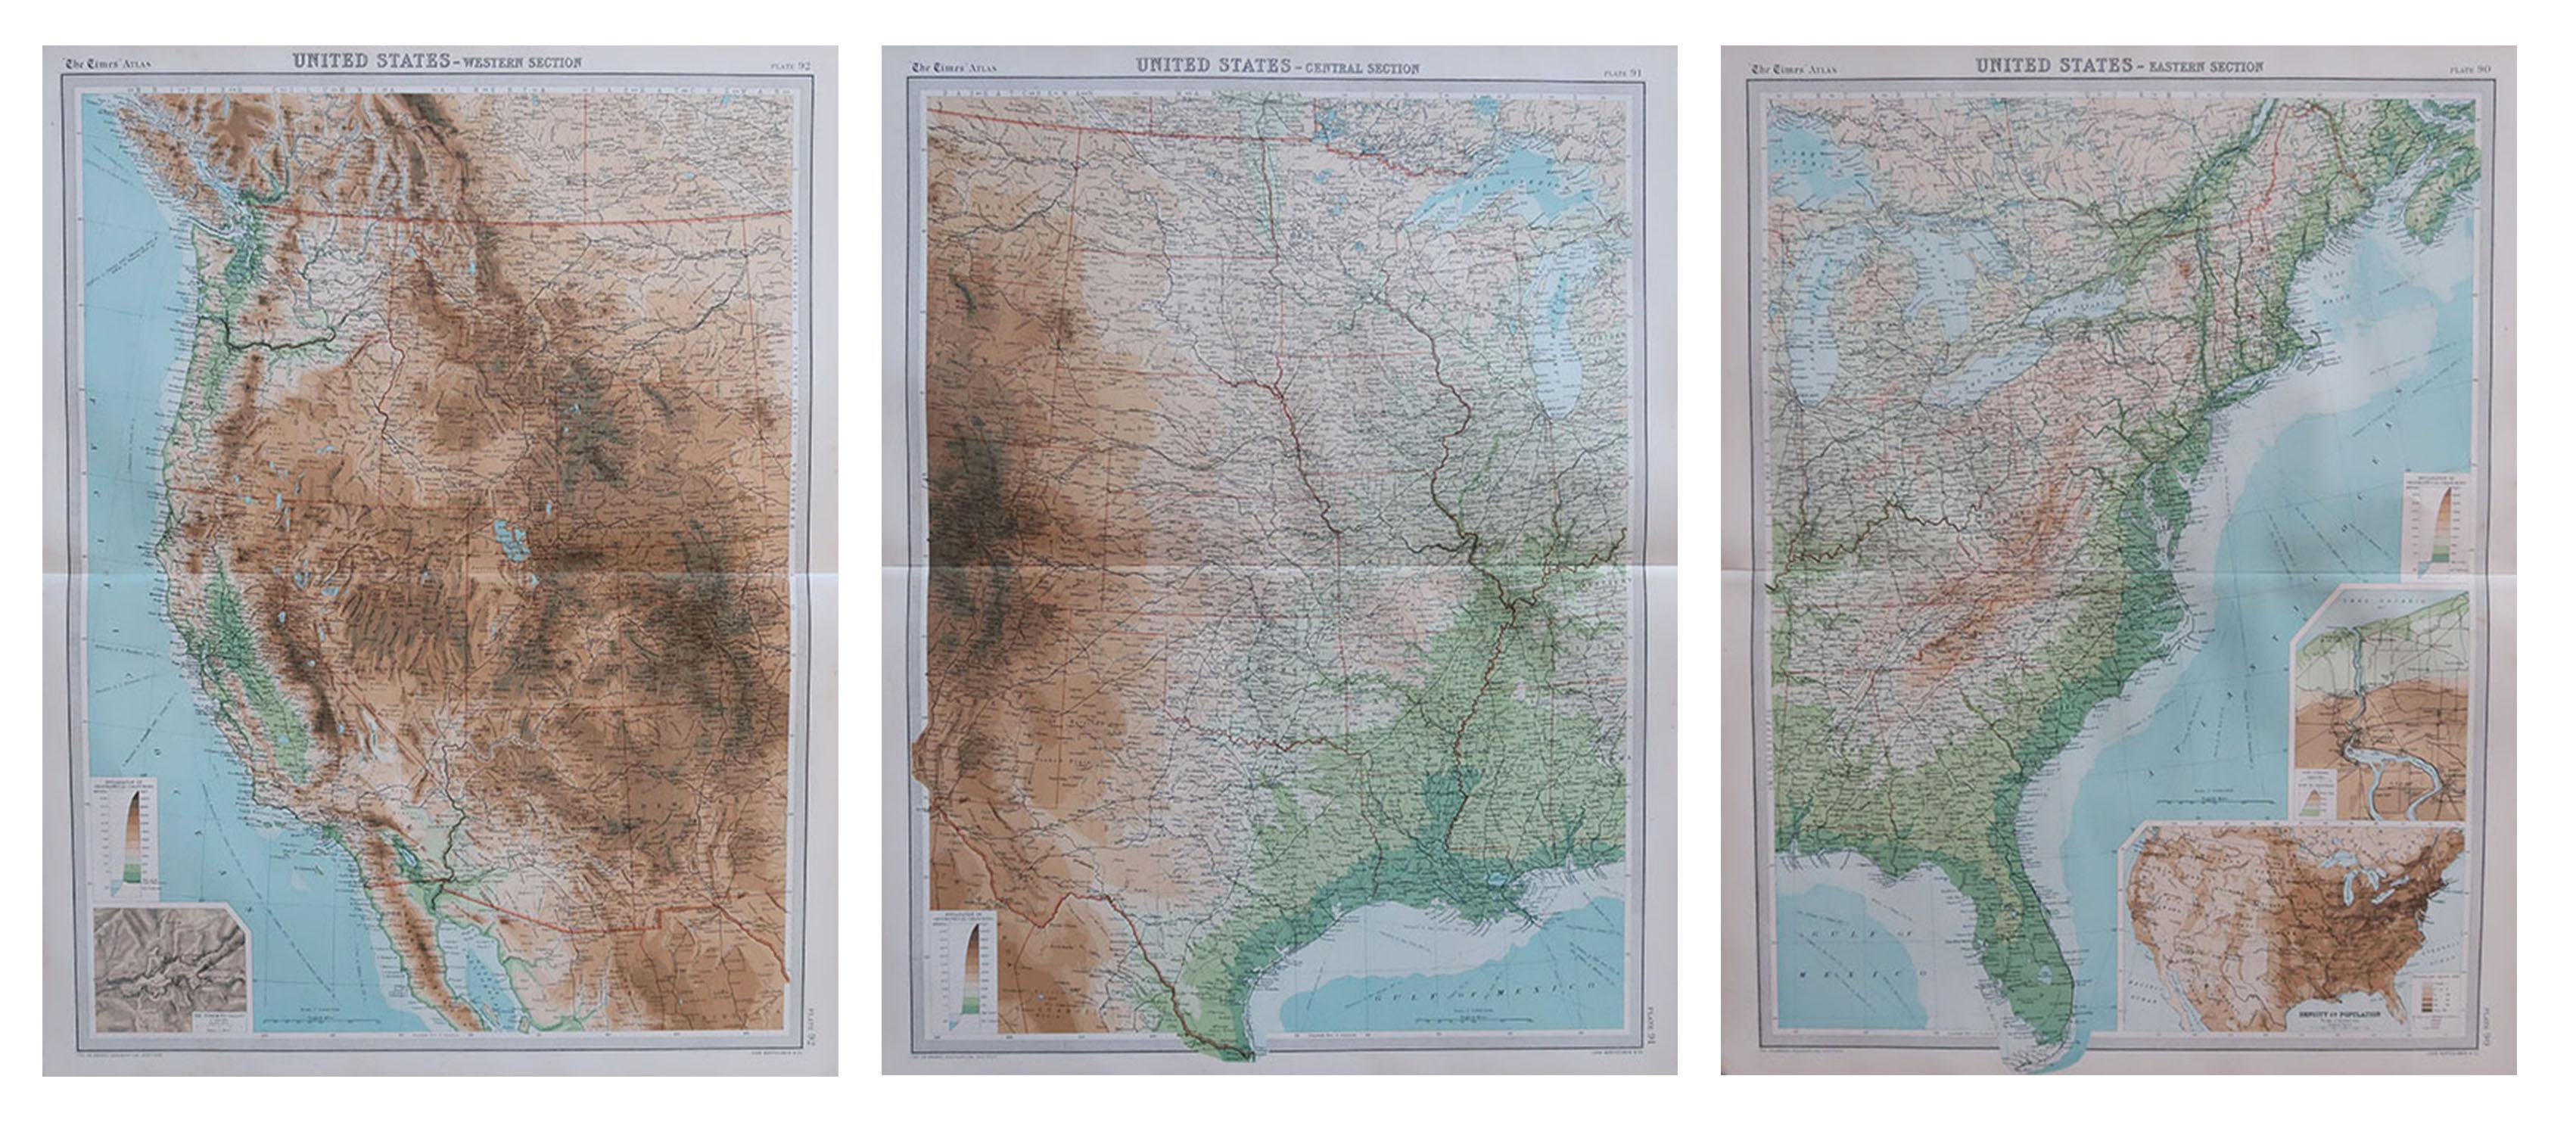 Great maps of the USA in 3 sections

Unframed

Original color

By John Bartholomew and Co. Edinburgh Geographical Institute

Published, circa 1920

The measurements given is for just one of the sheets

Free shipping.
 